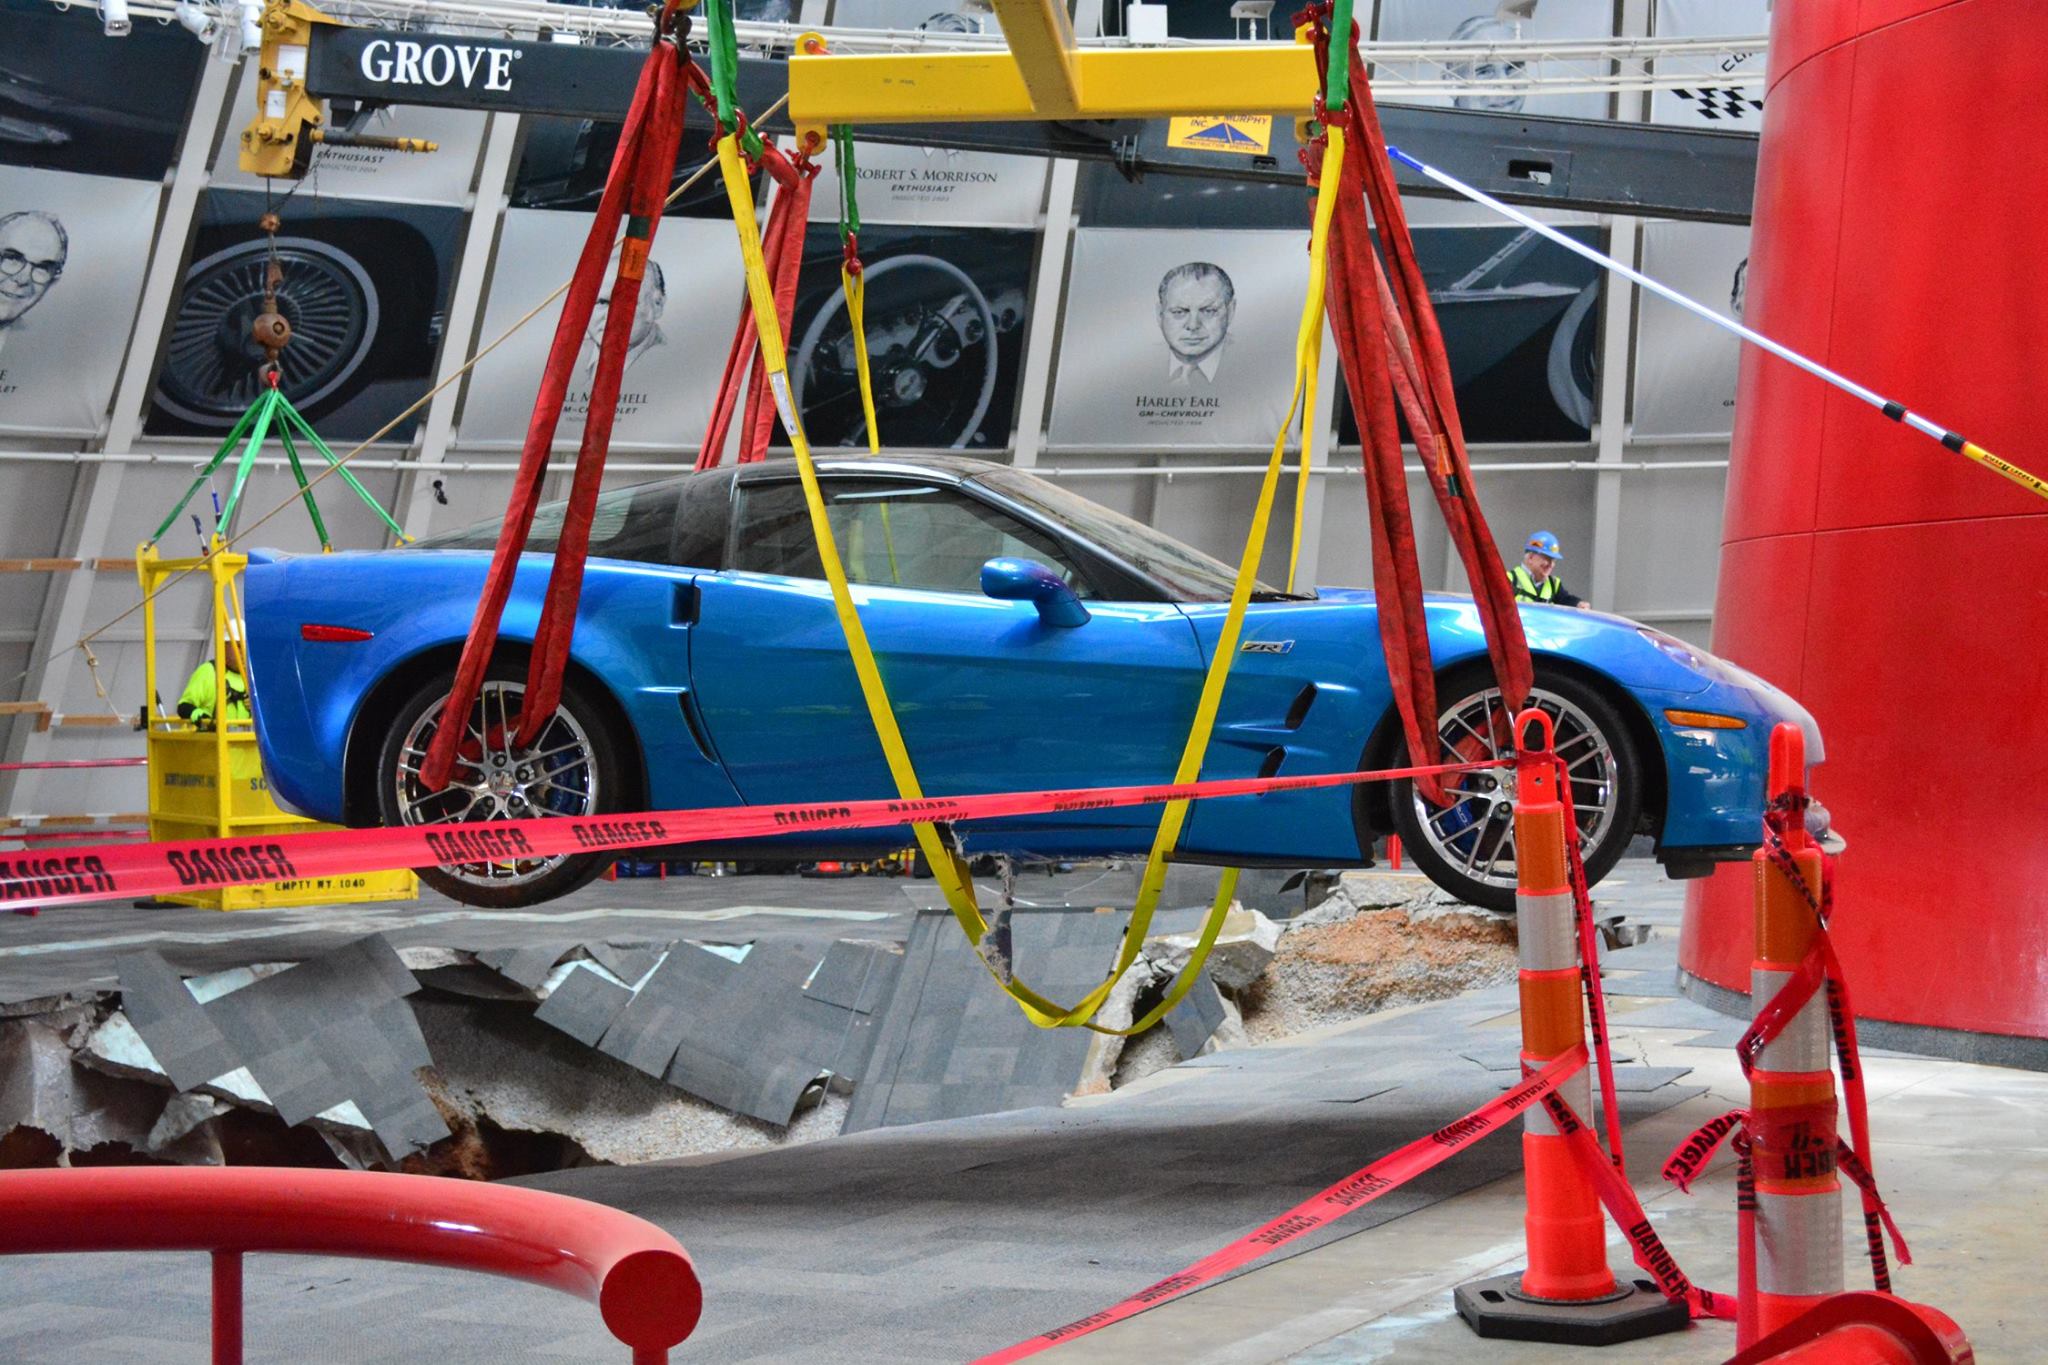 The Blue Devil Lives! First Corvette Extracted from NCM Sinkhole 